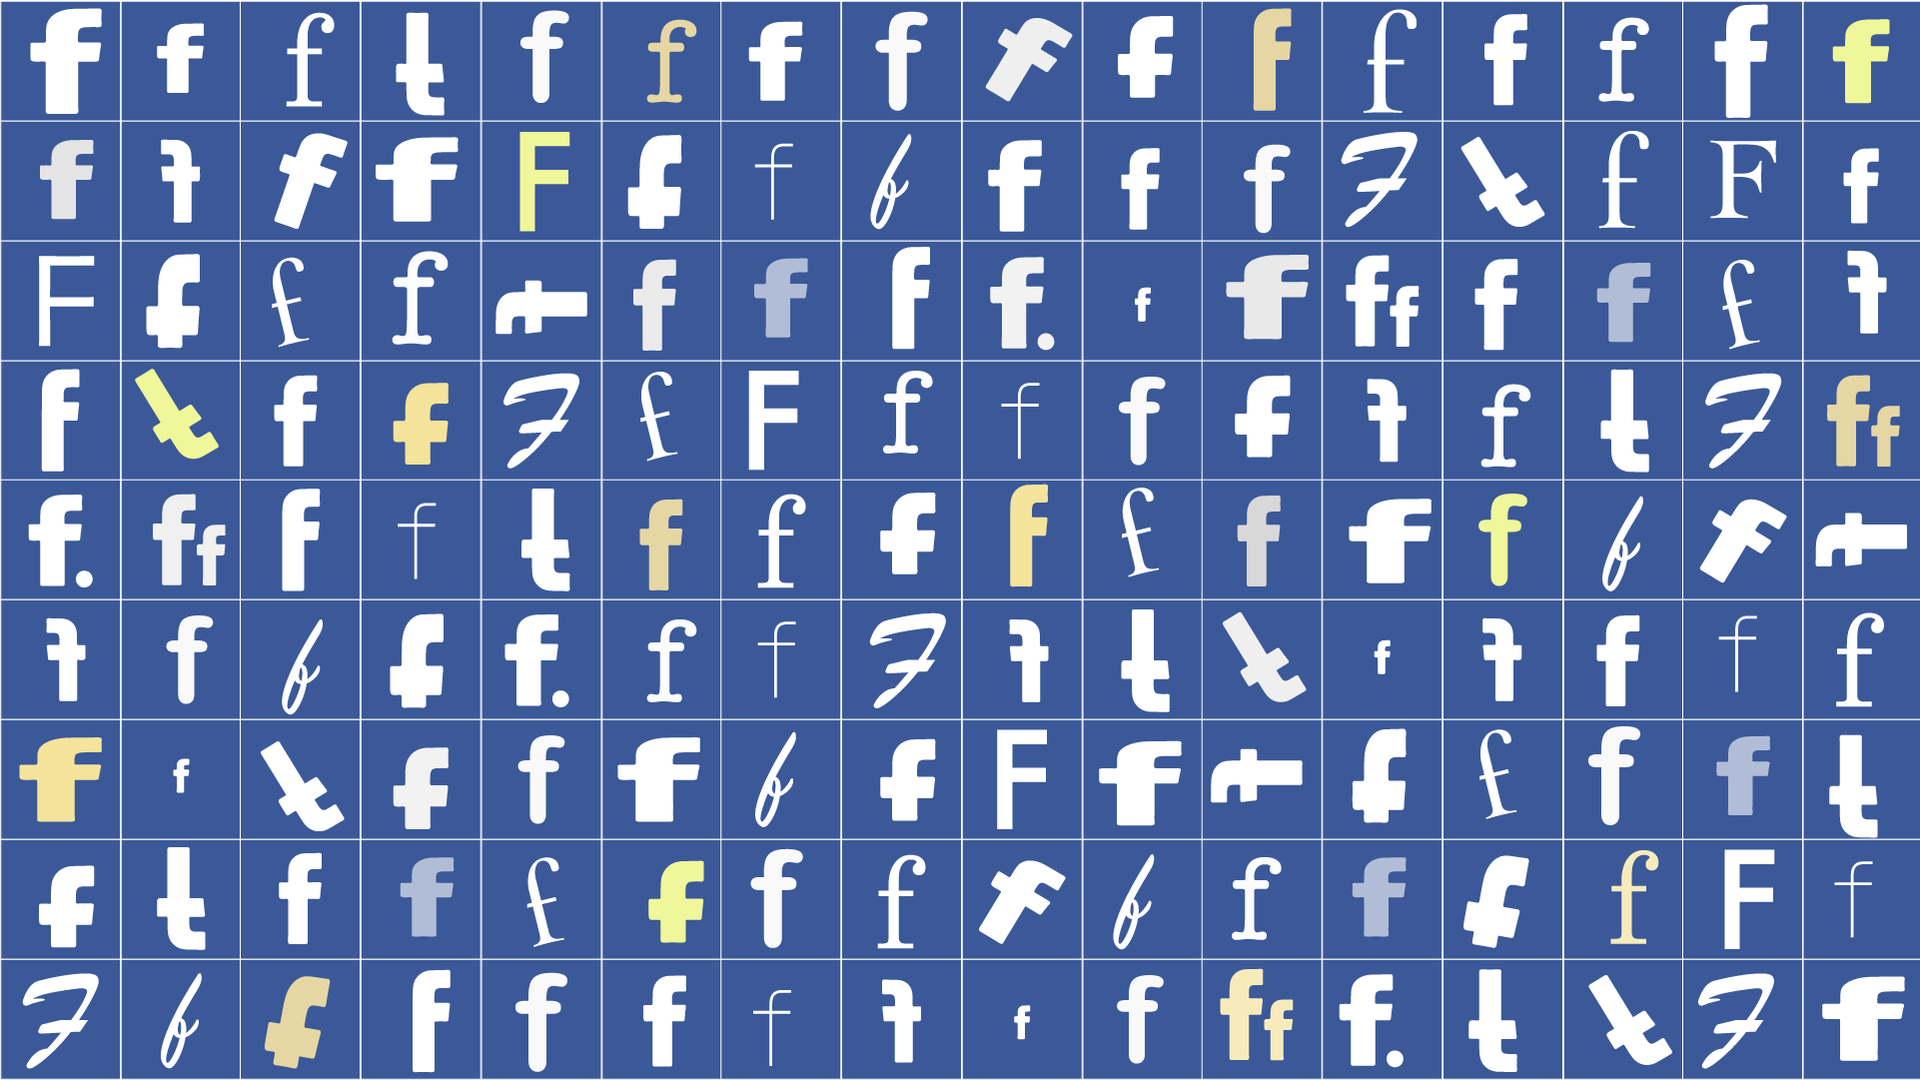 An illustration of the Facebook letter "F" logo intermingled with lots of other "F"s